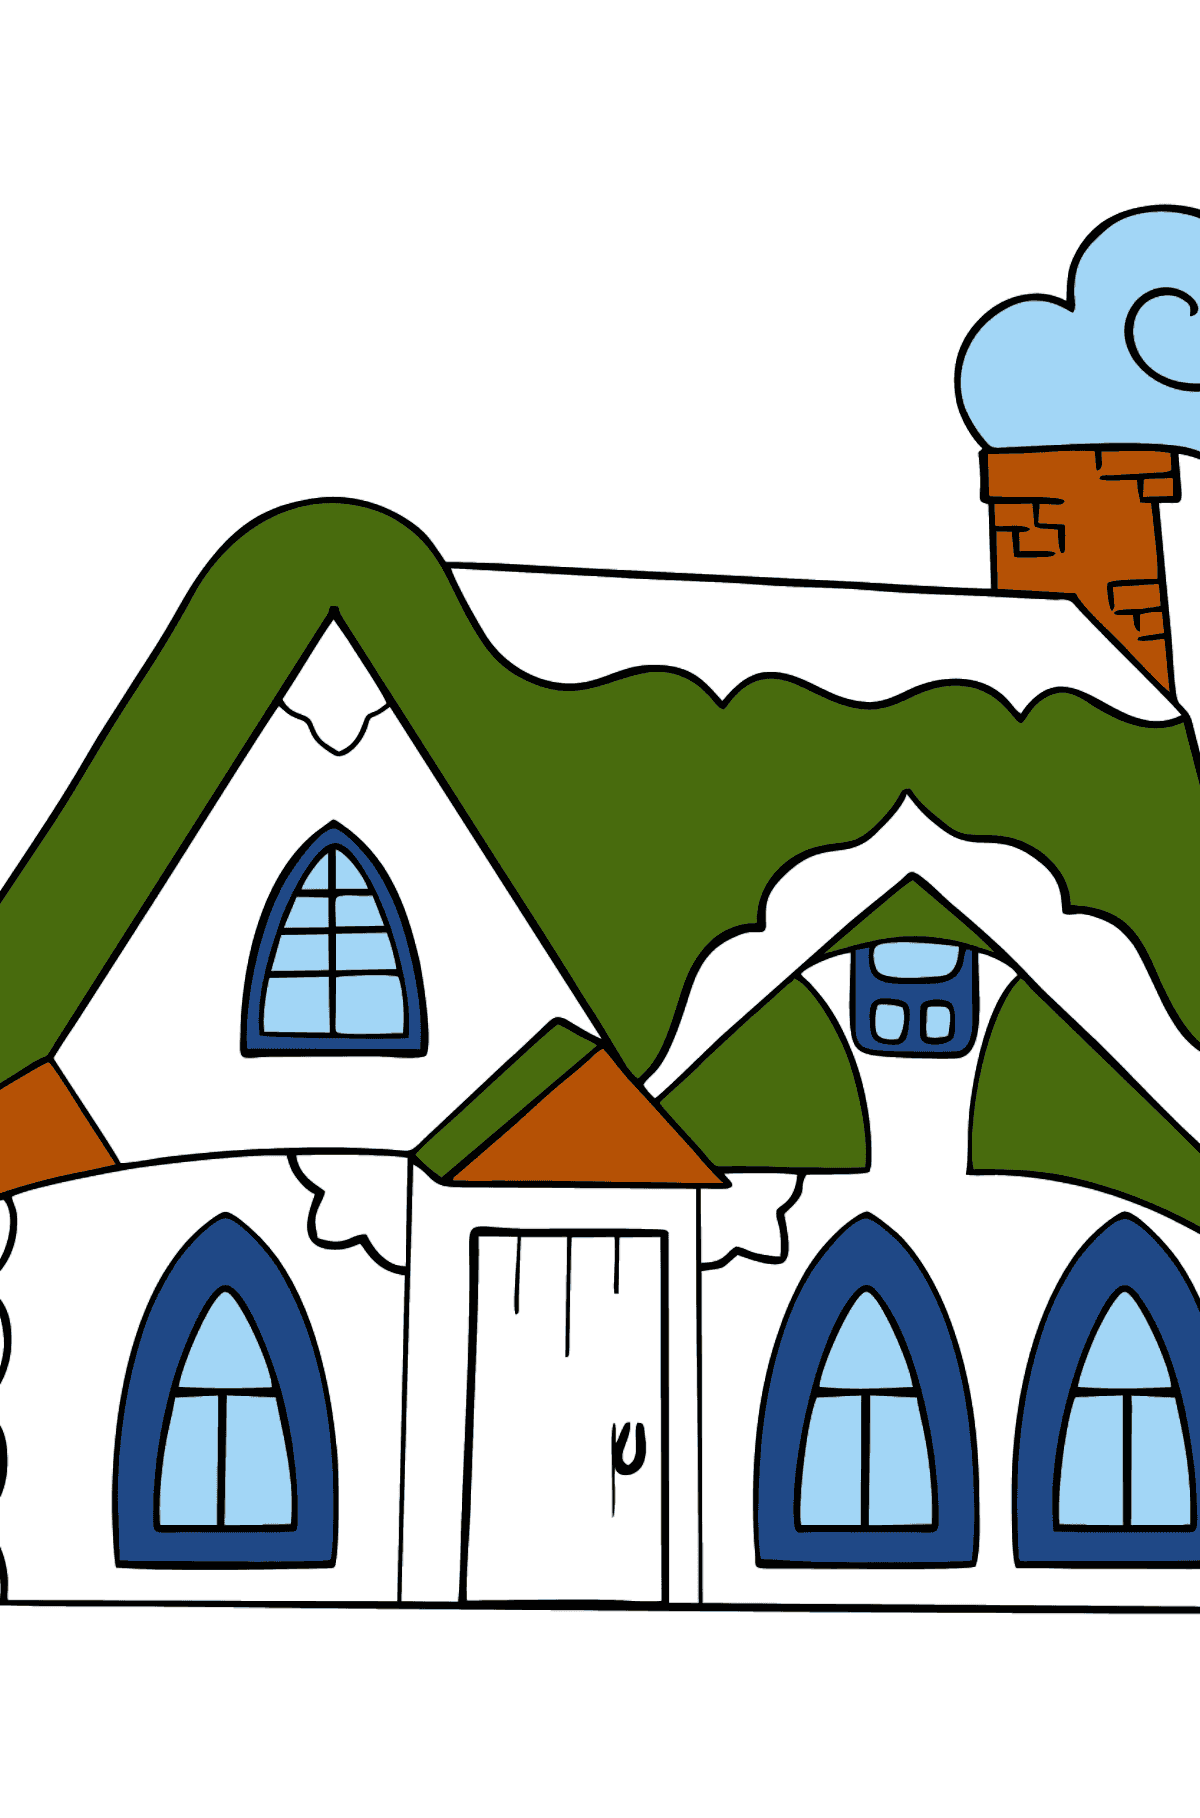 Complex Coloring Page - A Fairytale House - Coloring Pages for Kids